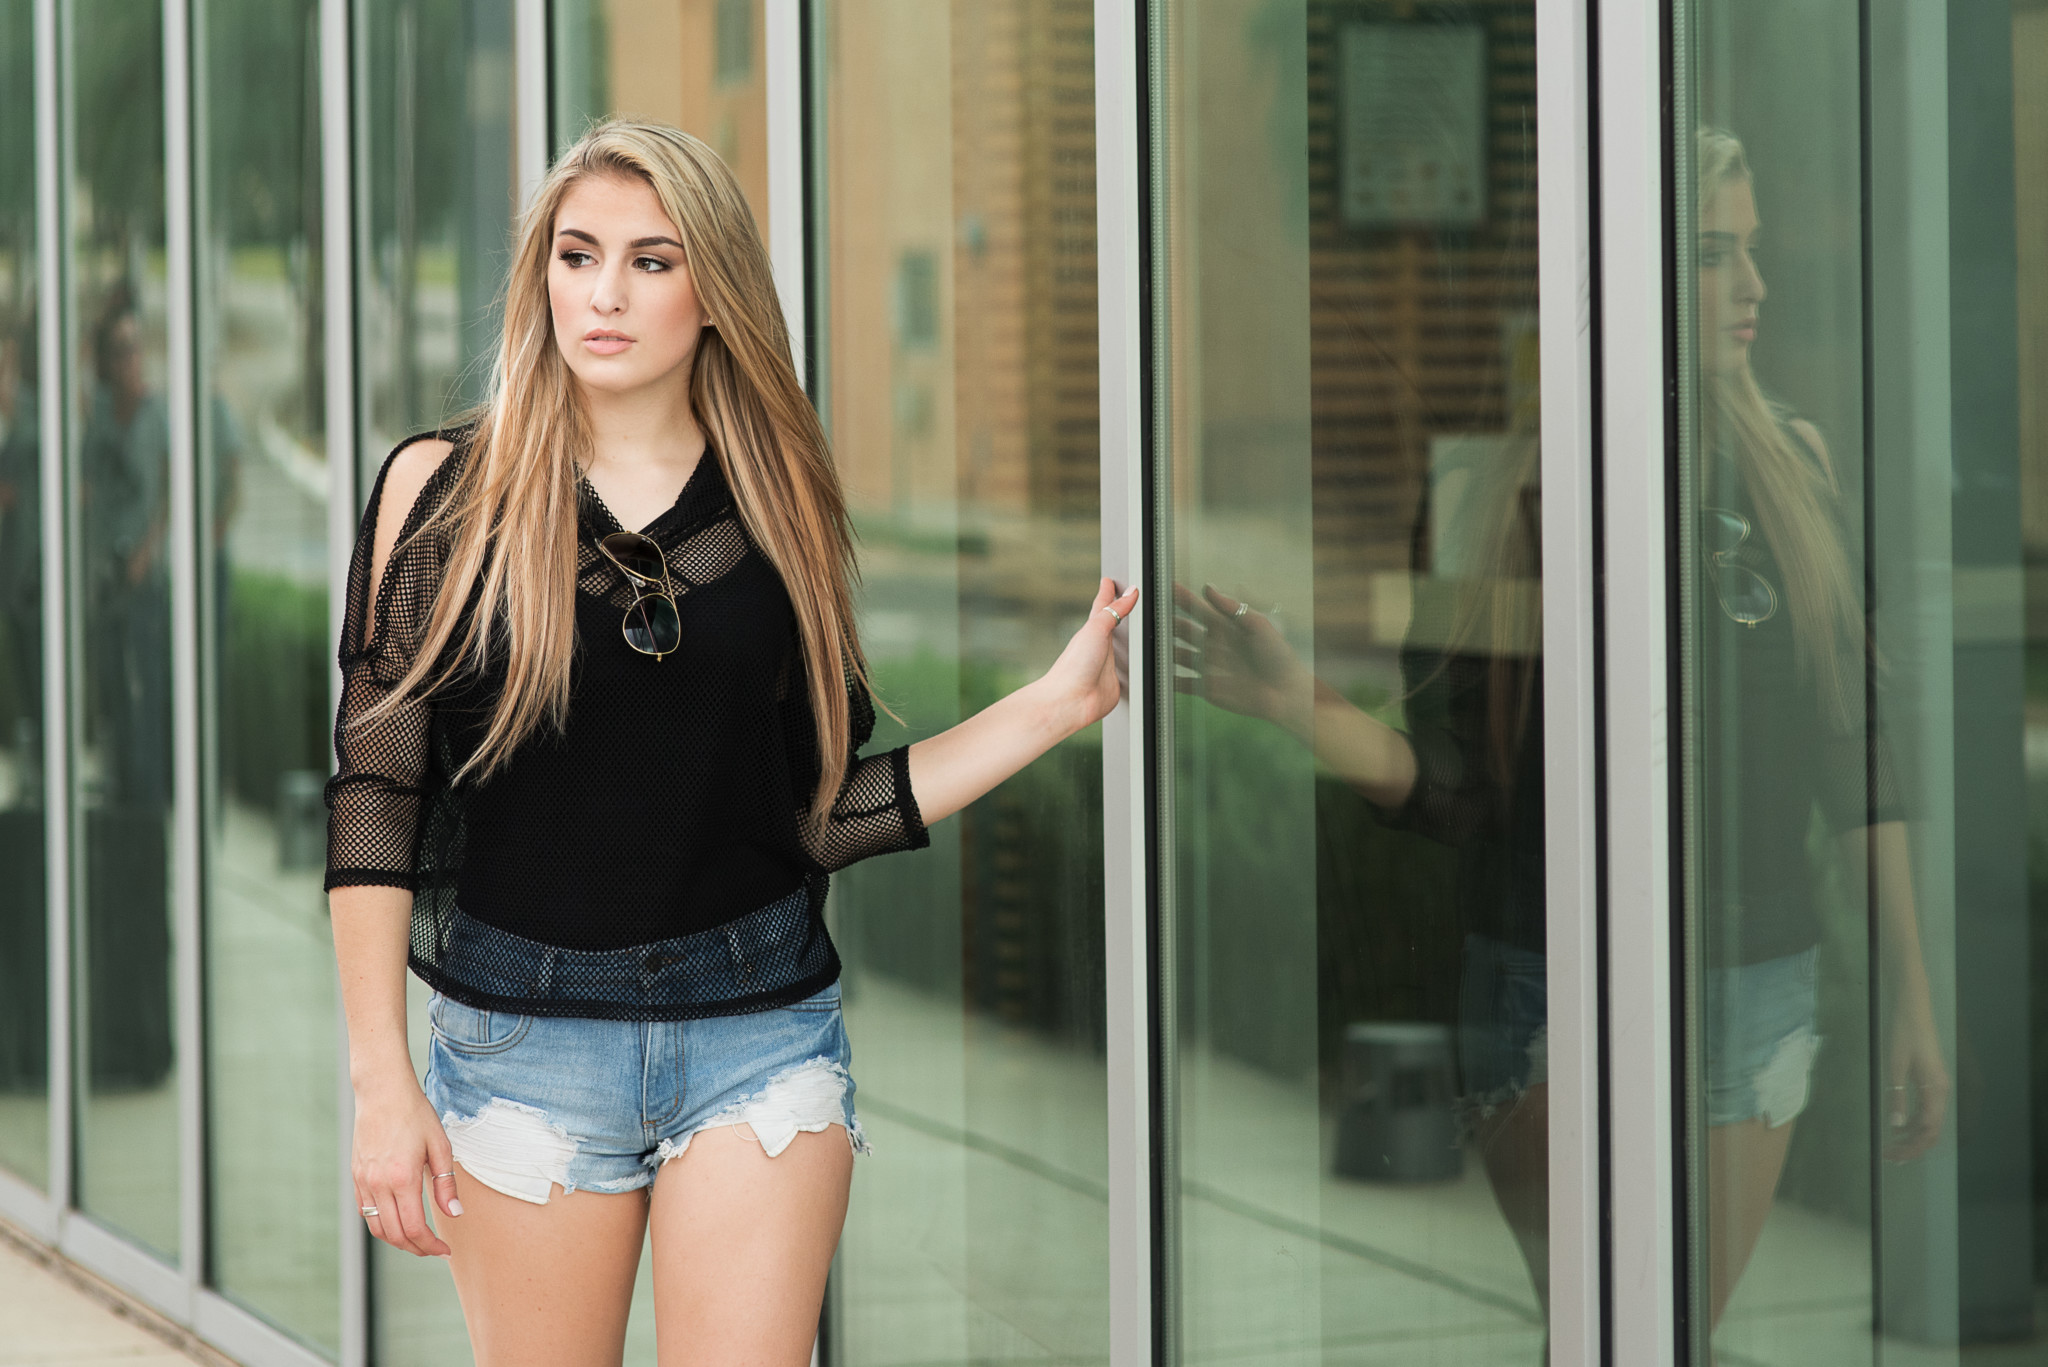 mars high school senior walks along glass wall during her urban senior pictures in cranberry twp pa